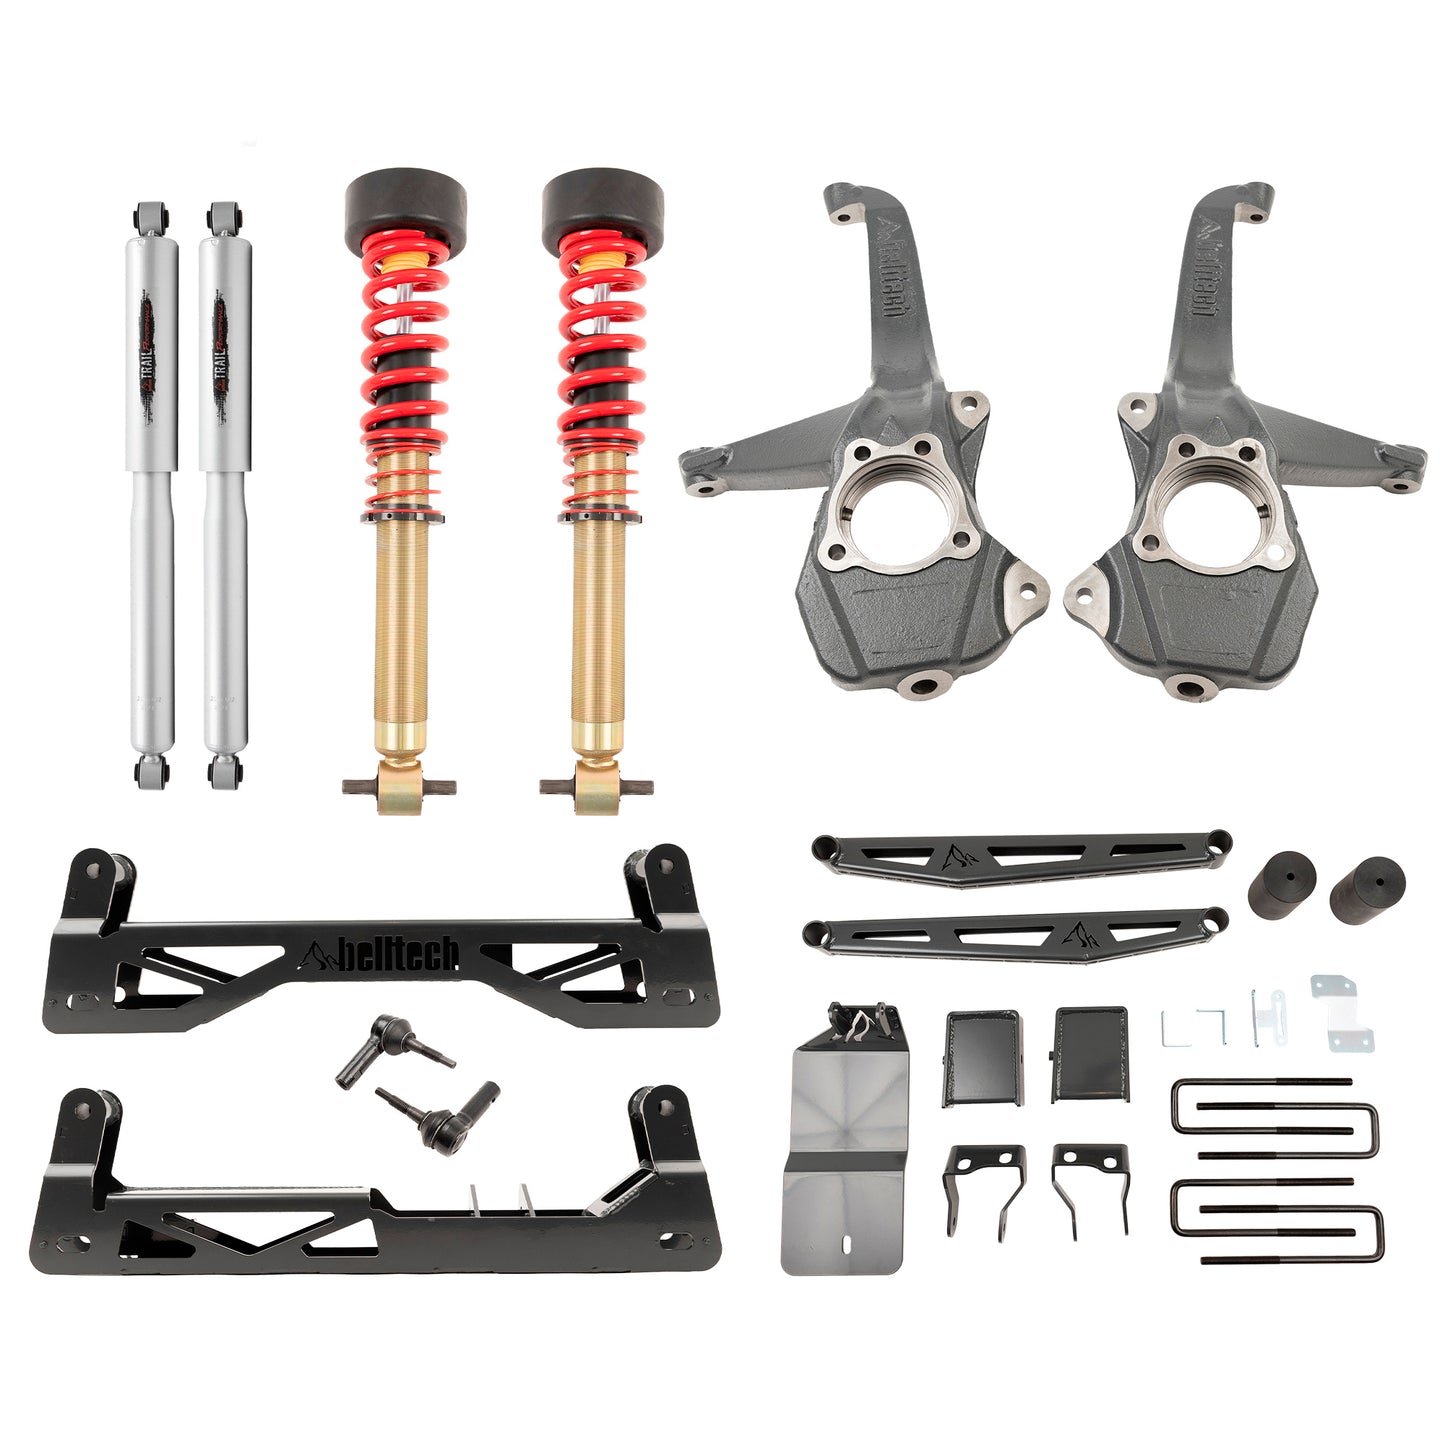 BELLTECH 150210TPC LIFT KIT 6-8IN. LIFT KIT INC. FRONT AND REAR TRAIL PERFORMANCE COILOVERS/SHOCKS 2019-2023 GM SILVERADO/SIERRA 1500 2WD/4WD 6-8IN. LIFT WITH TRAIL PEFORMANCE COILOVERS/SHOCKS